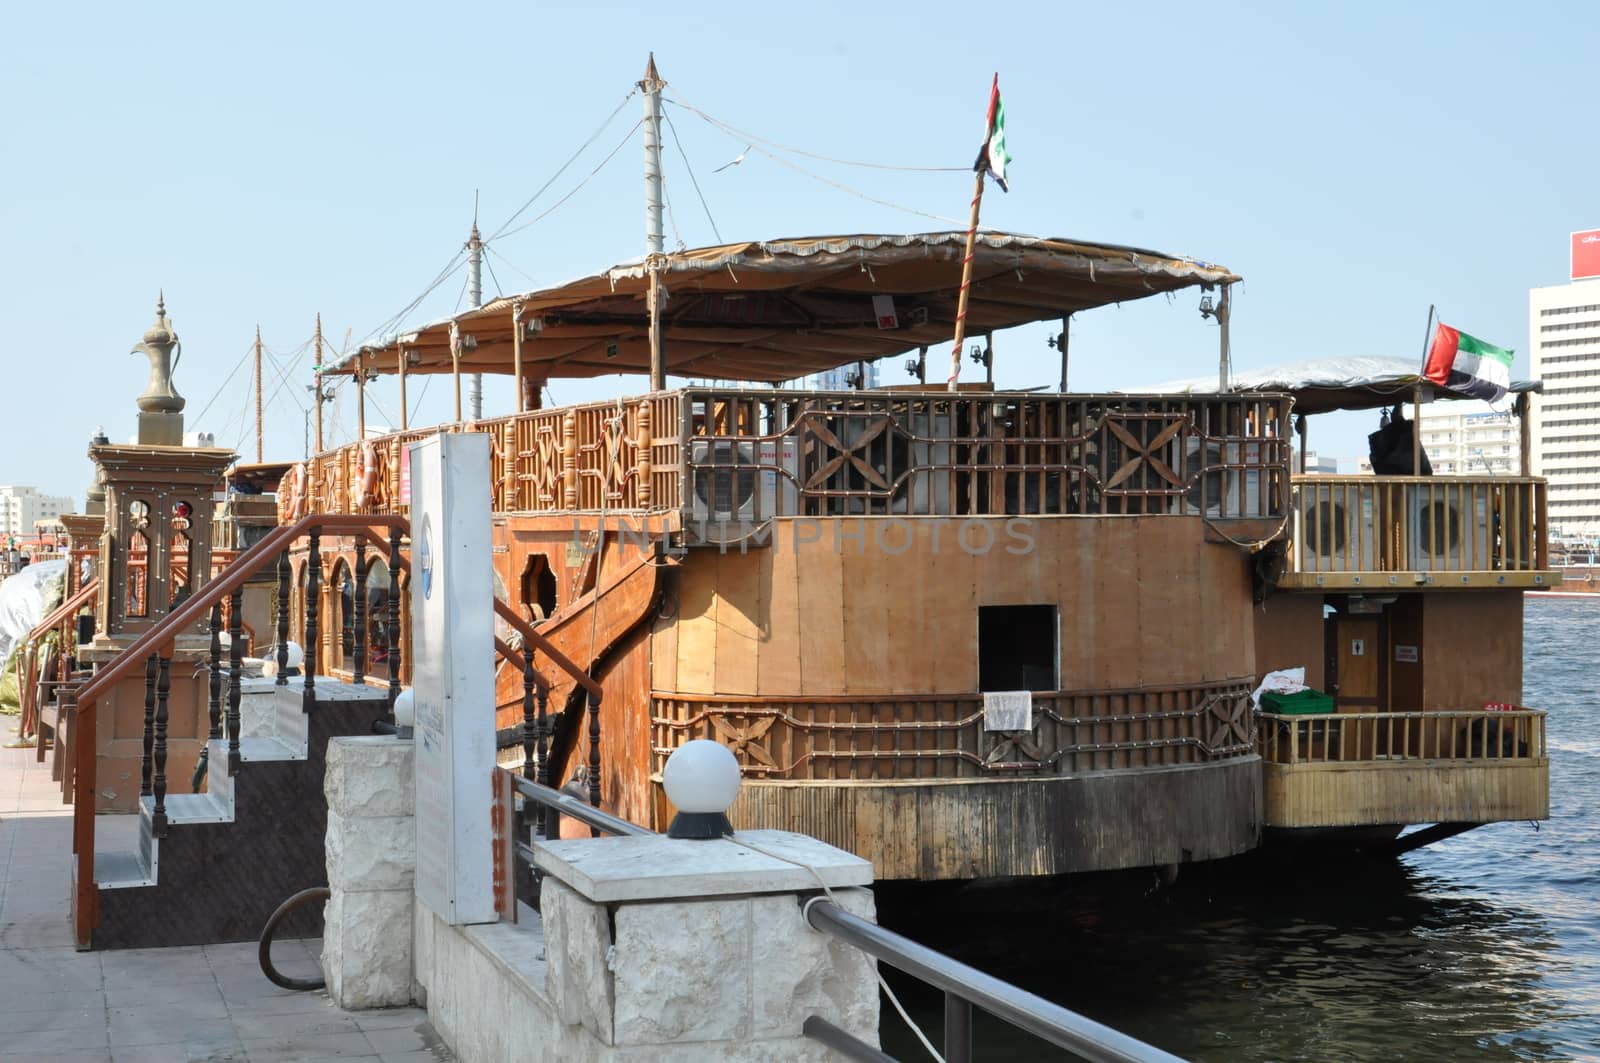 Boats, abras, dhows at Dubai Creek in the UAE. The creek still remains a significant trading hub for goods traded between Iran and The Arabian Peninsula.